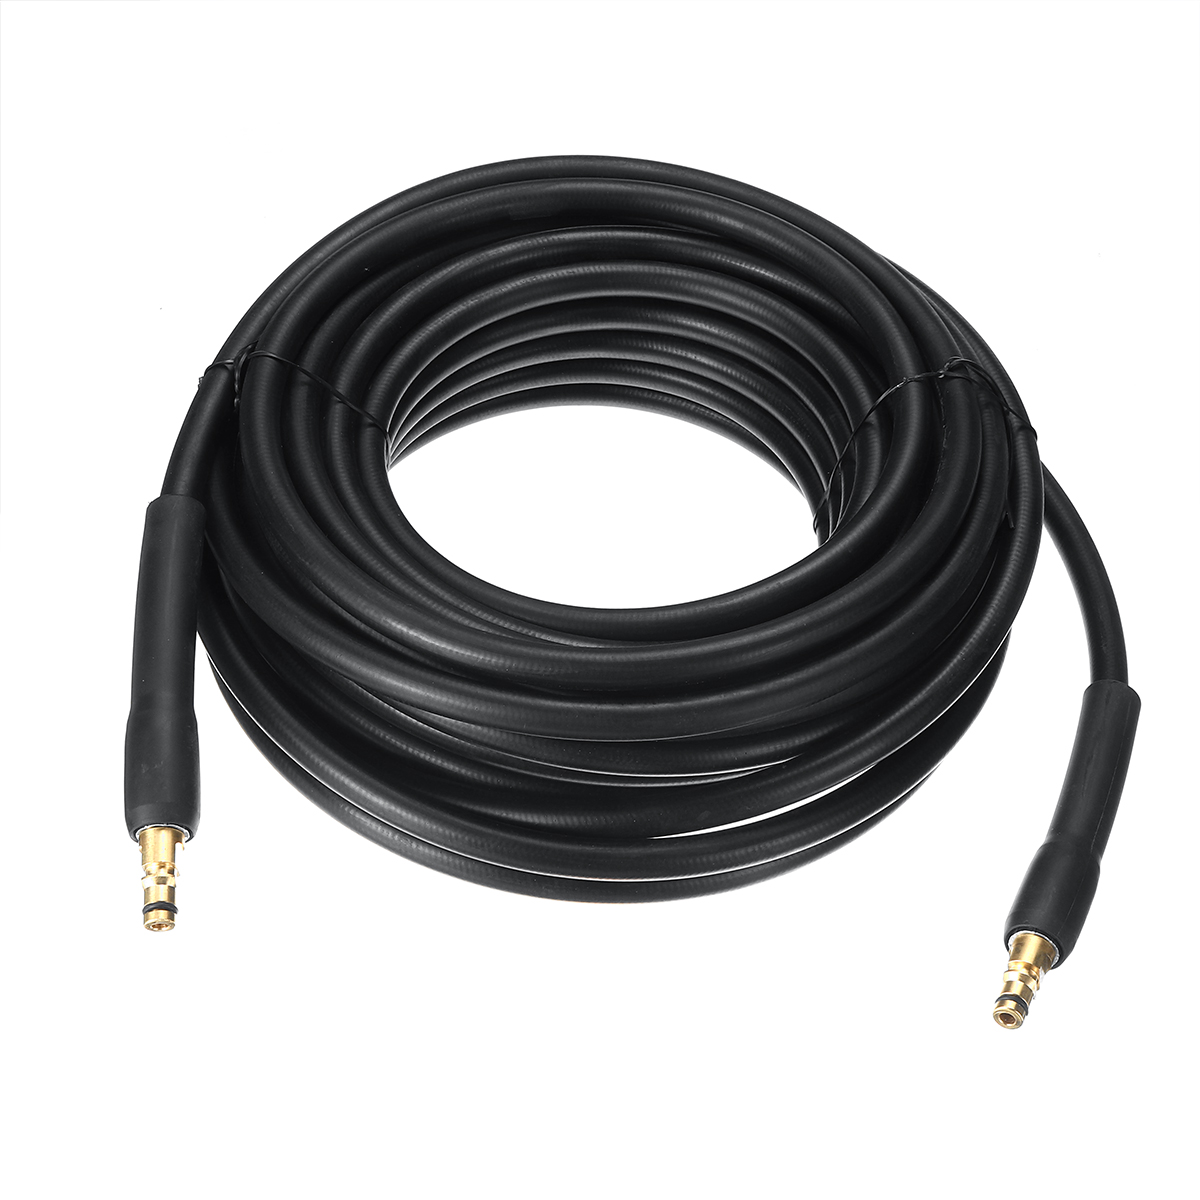 15M-Click-Head-High-Pressure-Washer-Hose-Car-Washer-Water-Cleaning-Hose-for-Karcher-K-Series-1563245-3